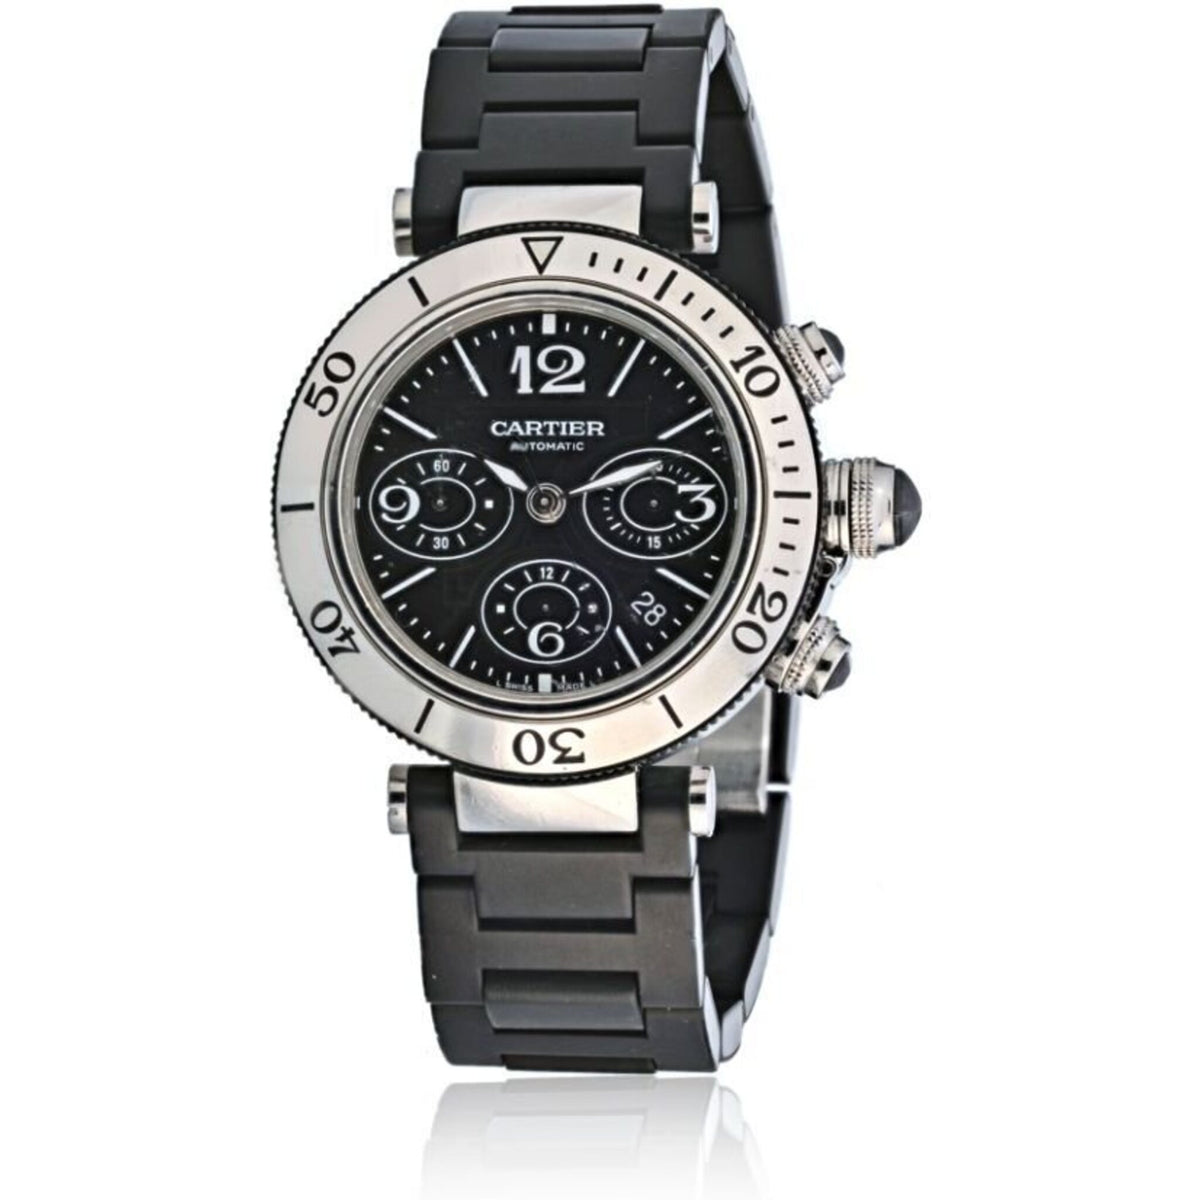 Cartier - Pasha Seatimer Stainless Steel 42mm Chronograph Black Watch